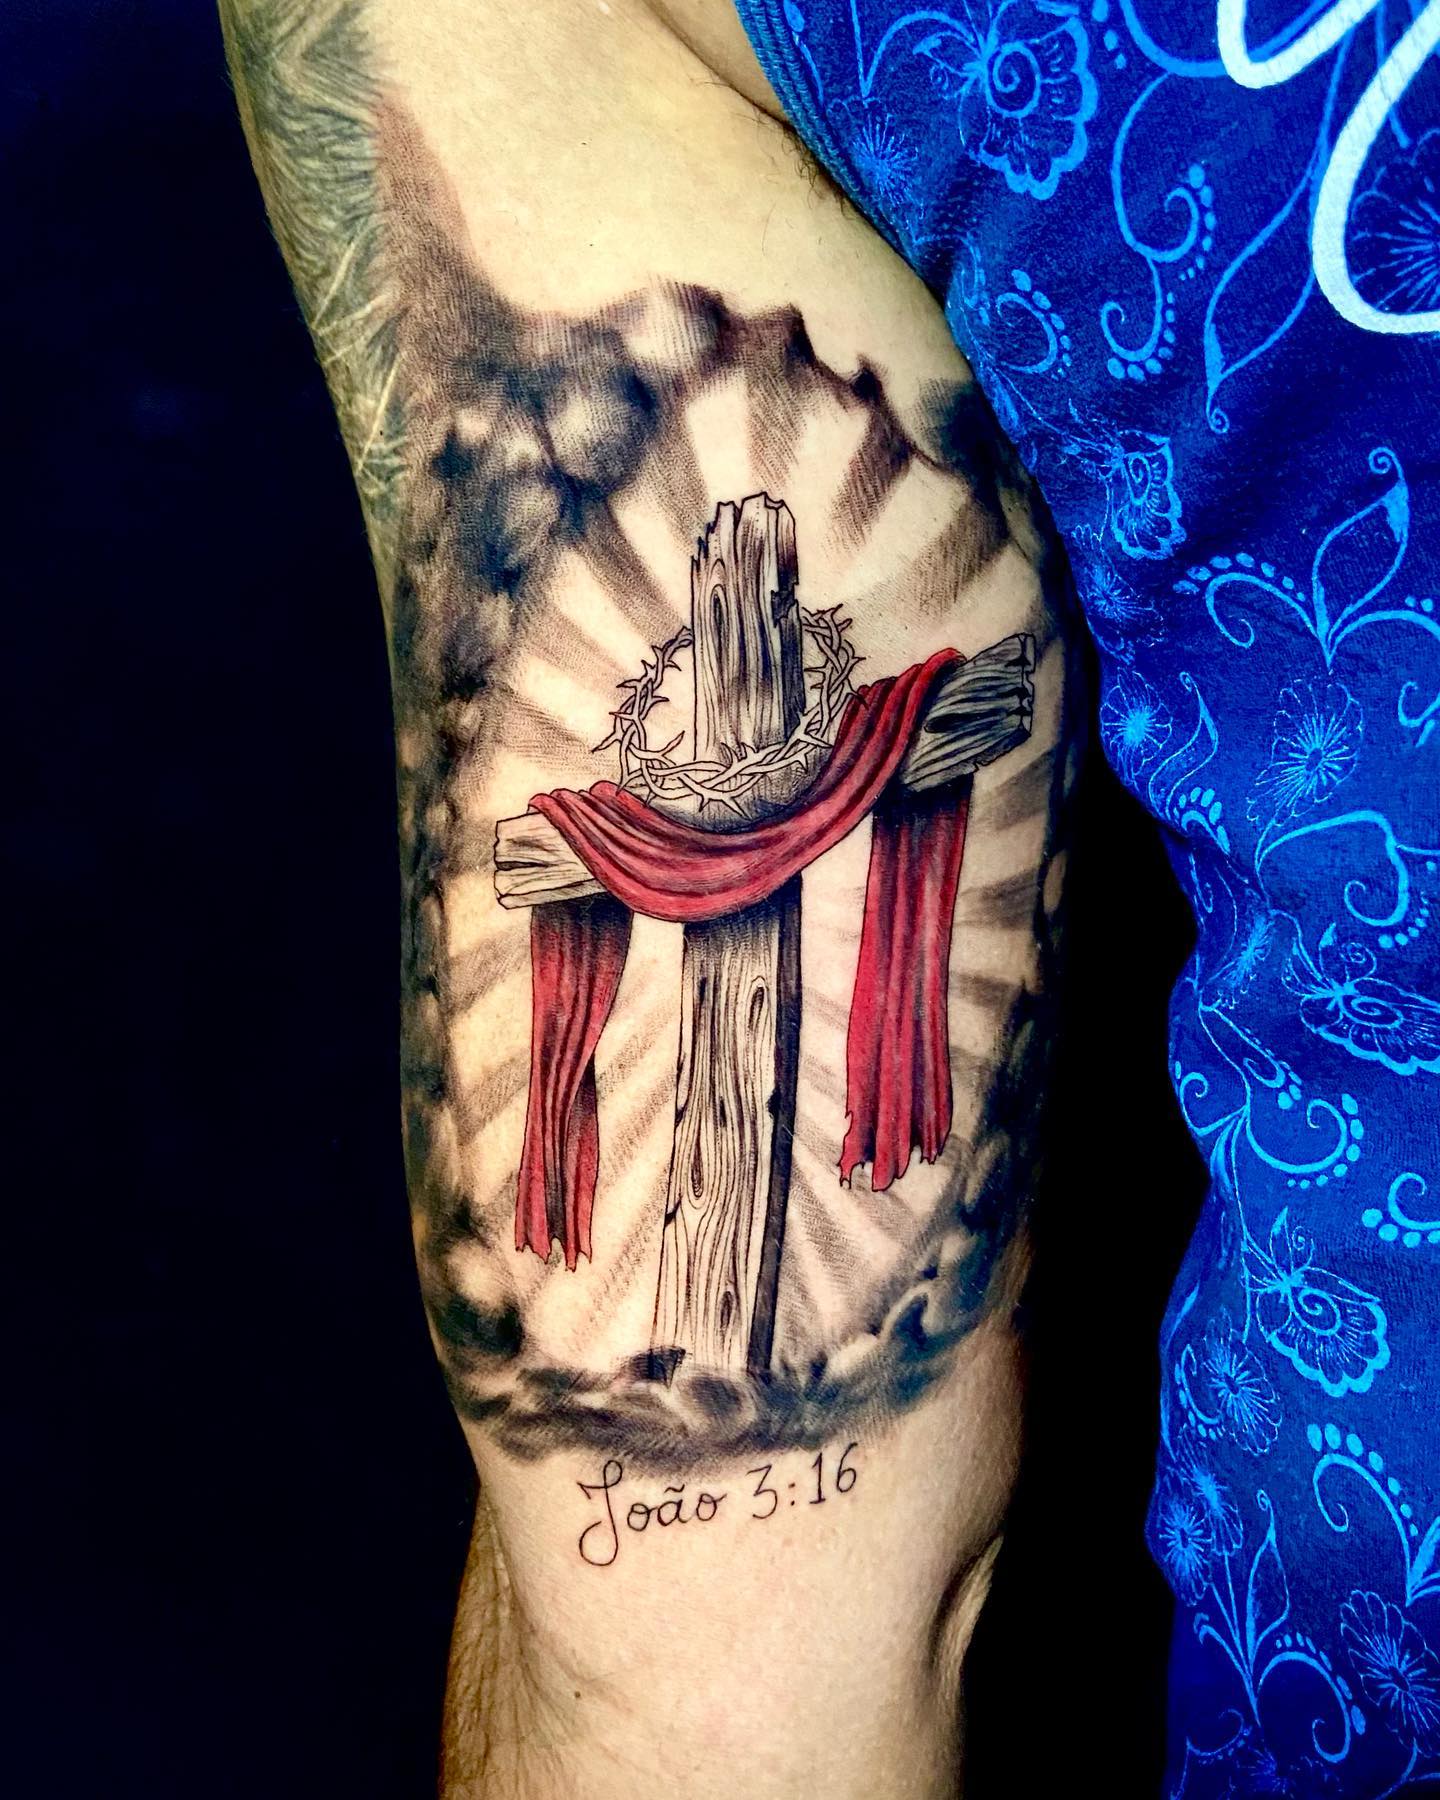 To make your religious tattoo full of meanings, you can mix related things. For example, on a wood cross, you can place the barbed wire crown that Jesus wore during crucifixion. He was forced to wear it before his death, so it is a special representation of Christian faith.